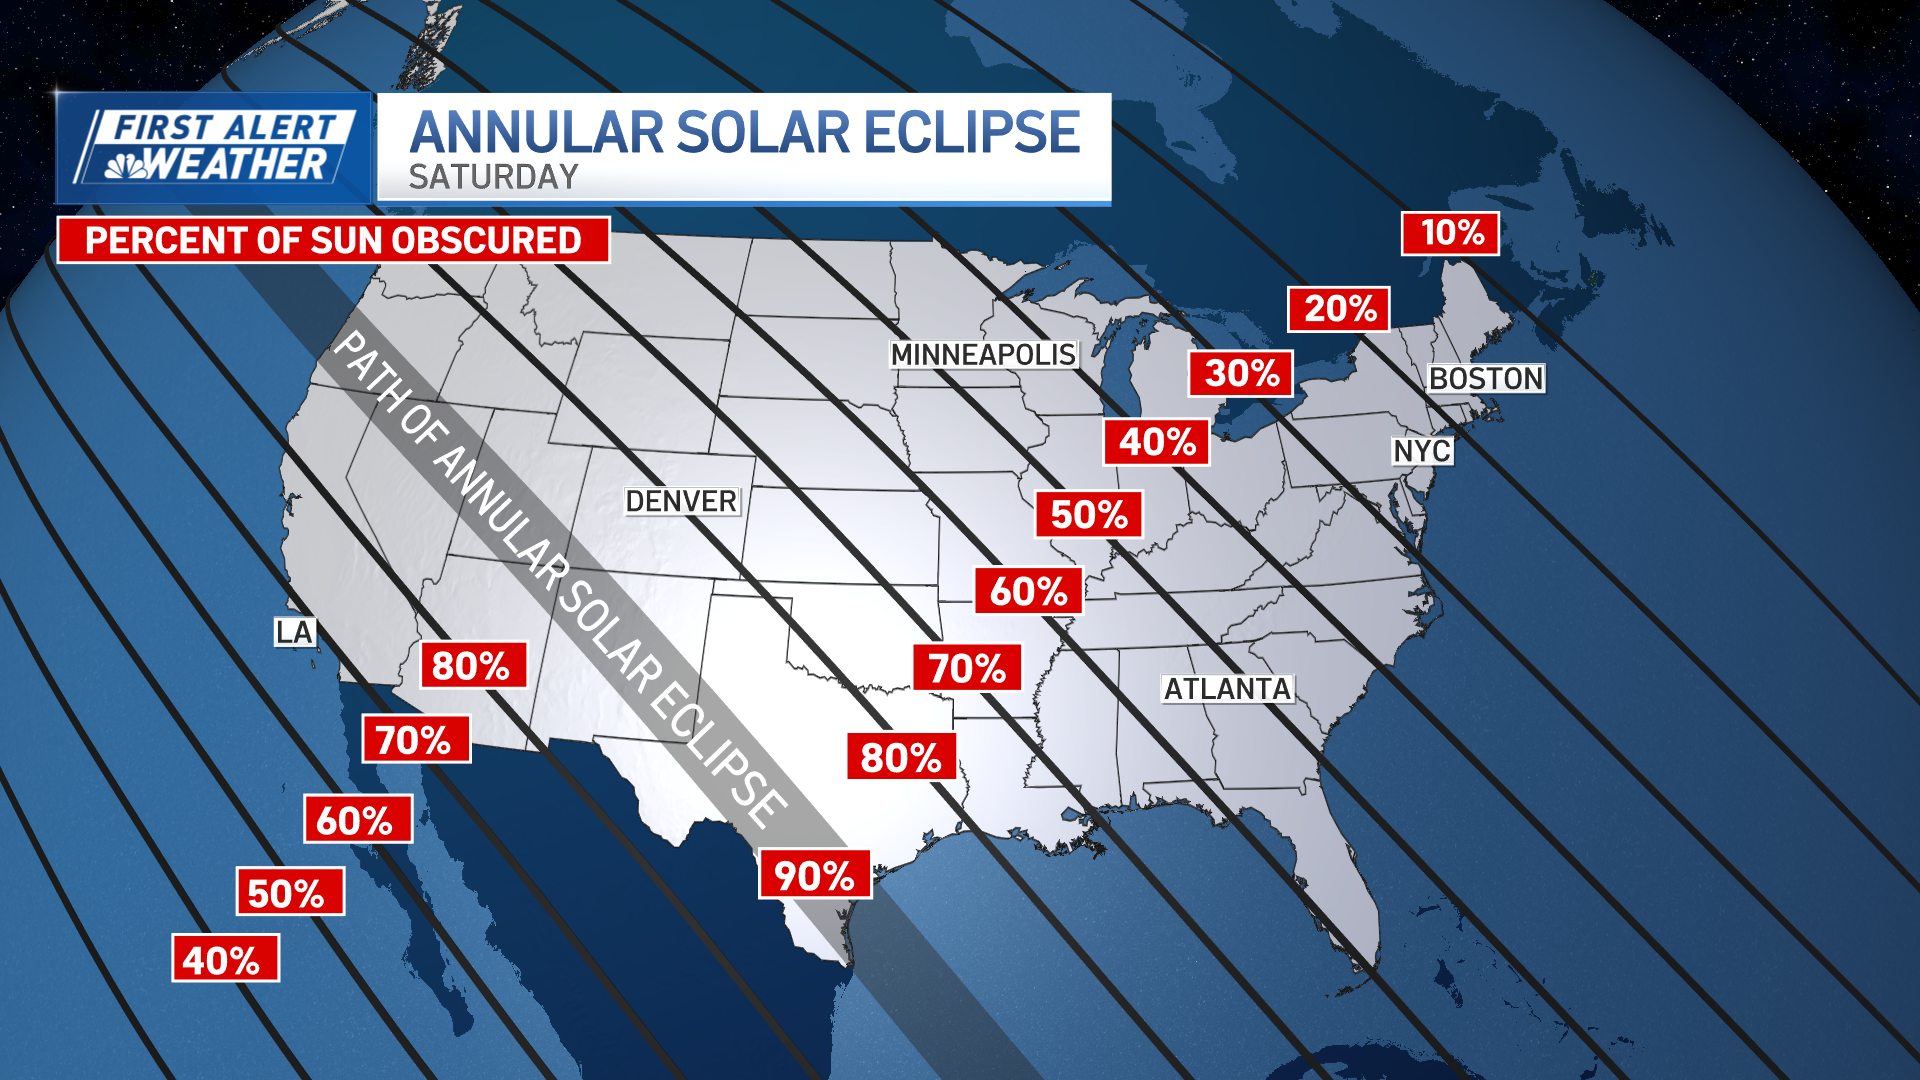 A map showing how much of the sun will be obscured during the annular solar eclipse on Saturday, Oct. 14, 2023. The maximum coverage of the sun, 90%, will be seen in a band from Oregon to Texas, while other parts of the country having less of the sun covered, down to about 10-20% in the Boston area and New England.